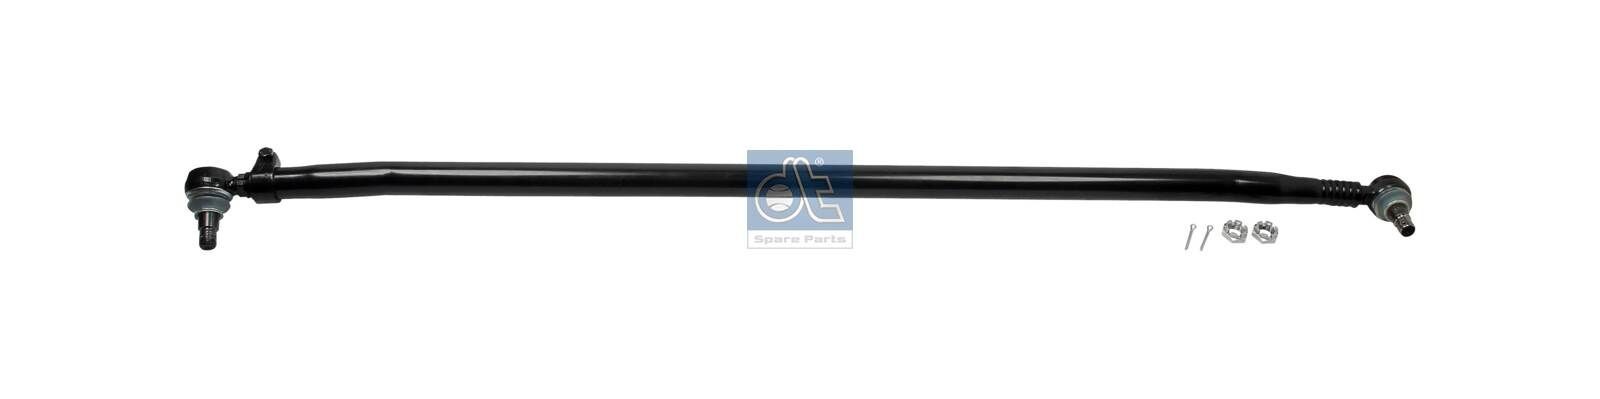 DT Spare Parts 1.19250 Rod Assembly 1 737 683